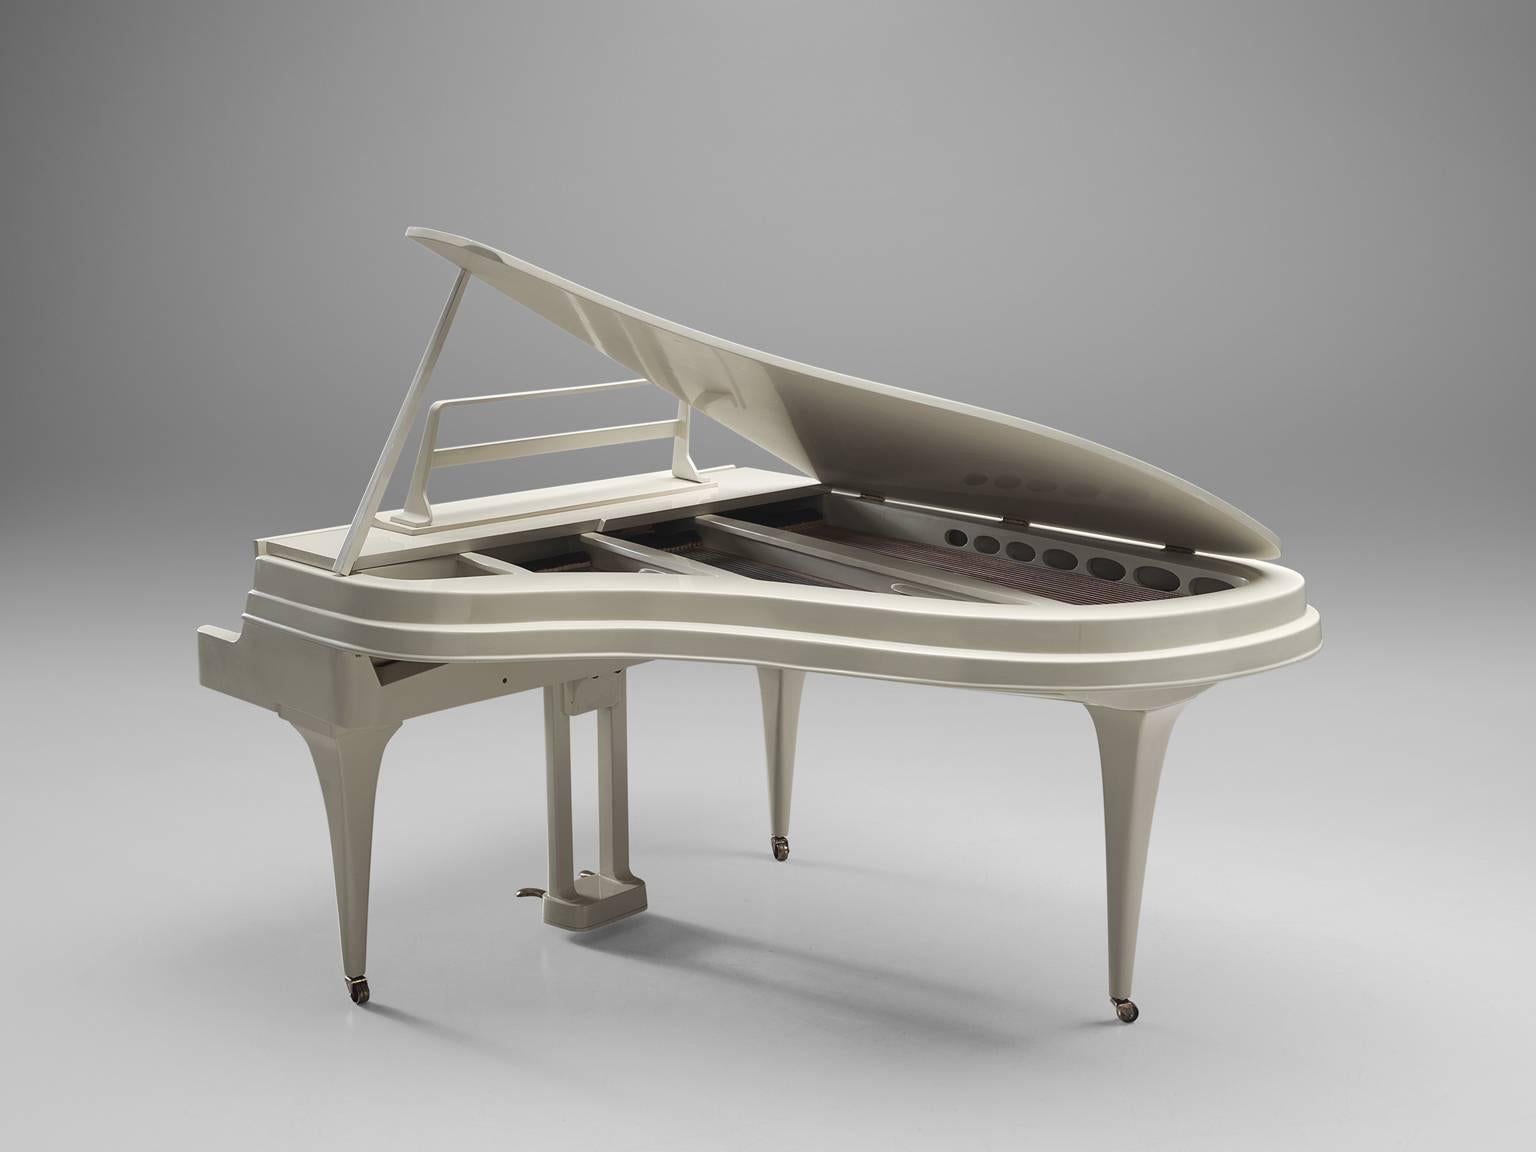 White grand piano, aluminium alloy, wood, brass by Rippen Pianofabriek N.V., the Netherlands, 1946 (production 1950s). 

This model is a renown grand piano by the Dutch piano maker Rippen from Ede. The model was a revolution when it was designed